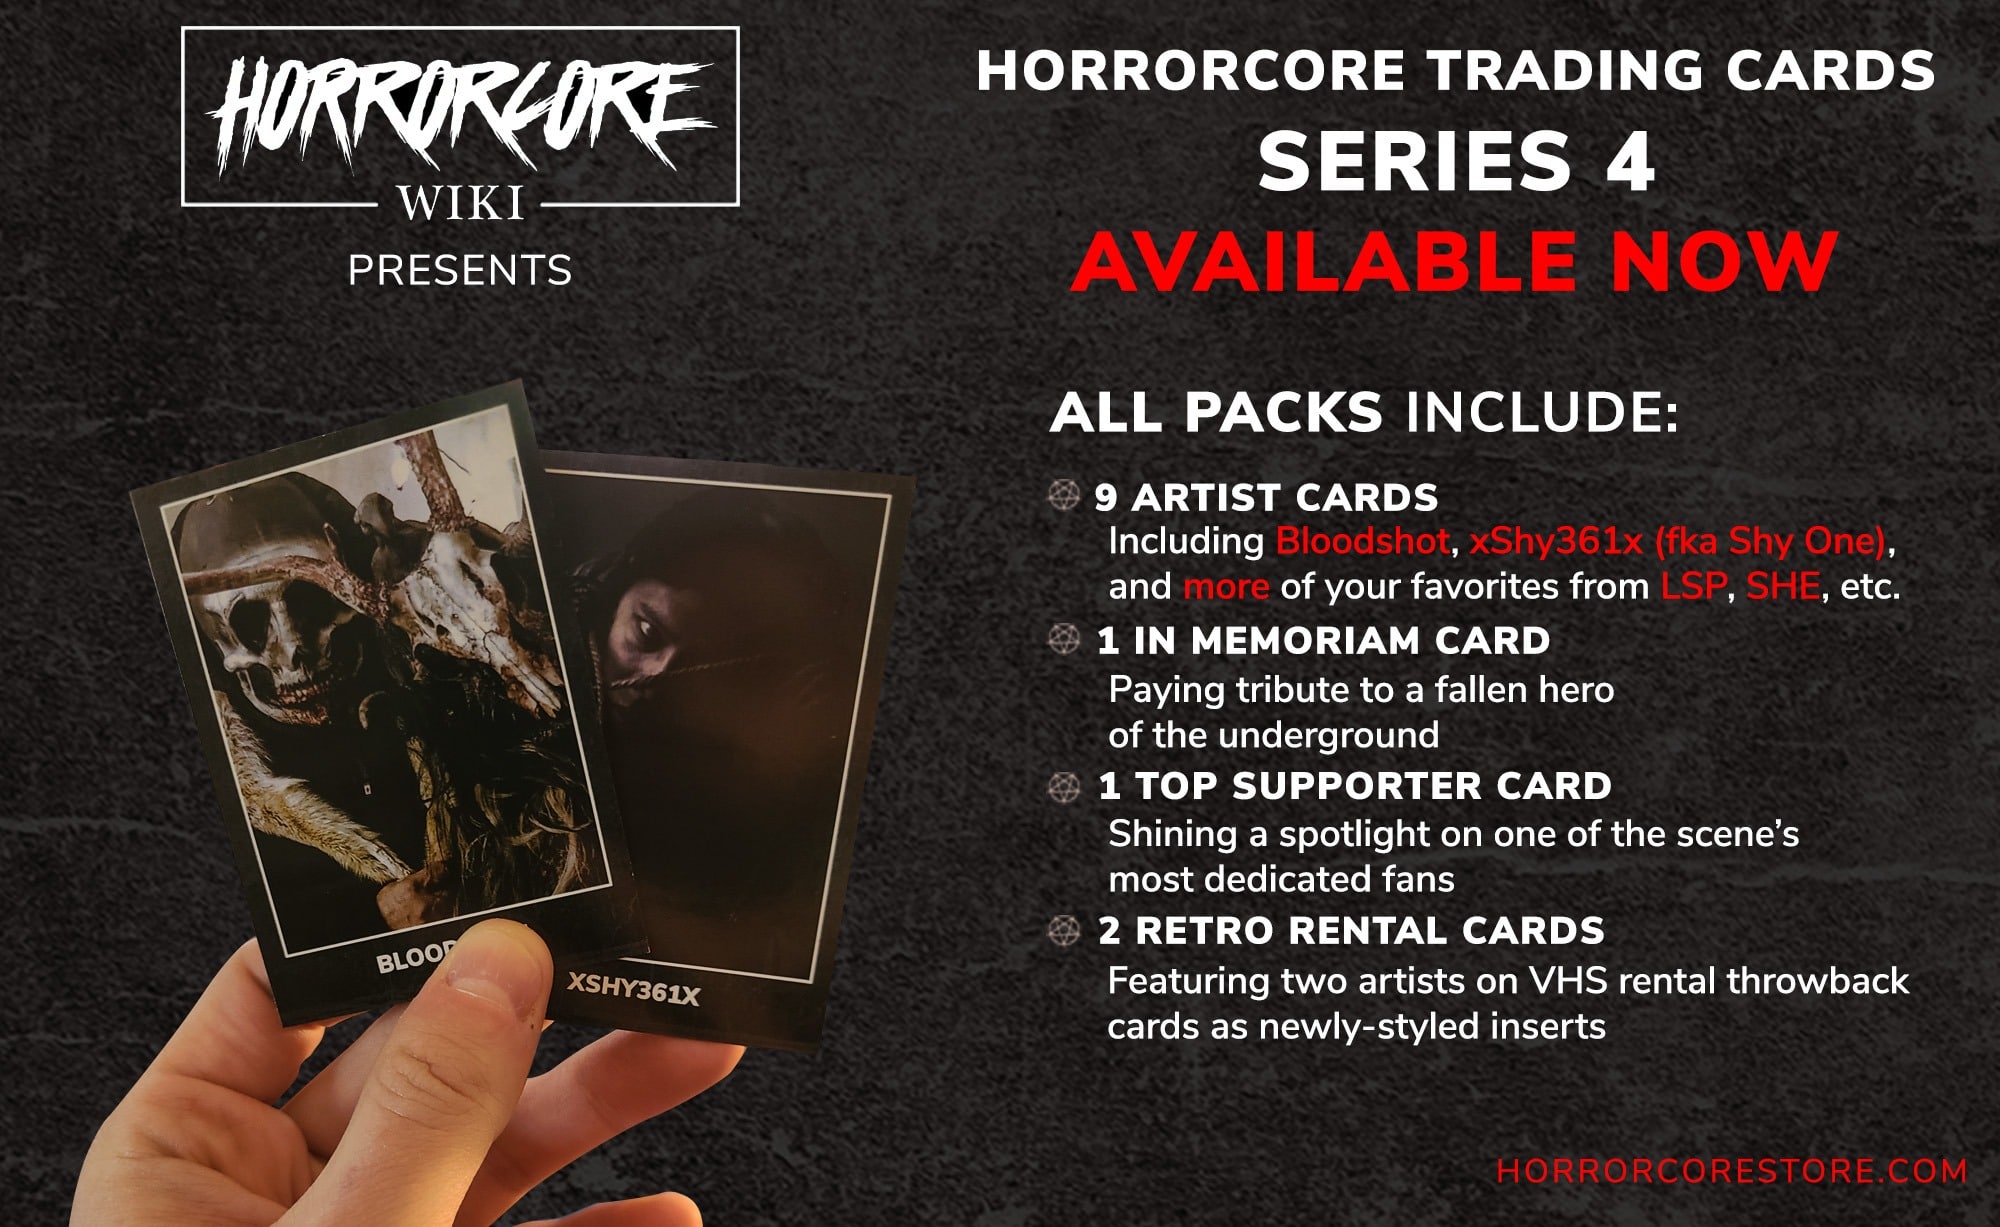 Horrorcore Trading Cards SERIES 4